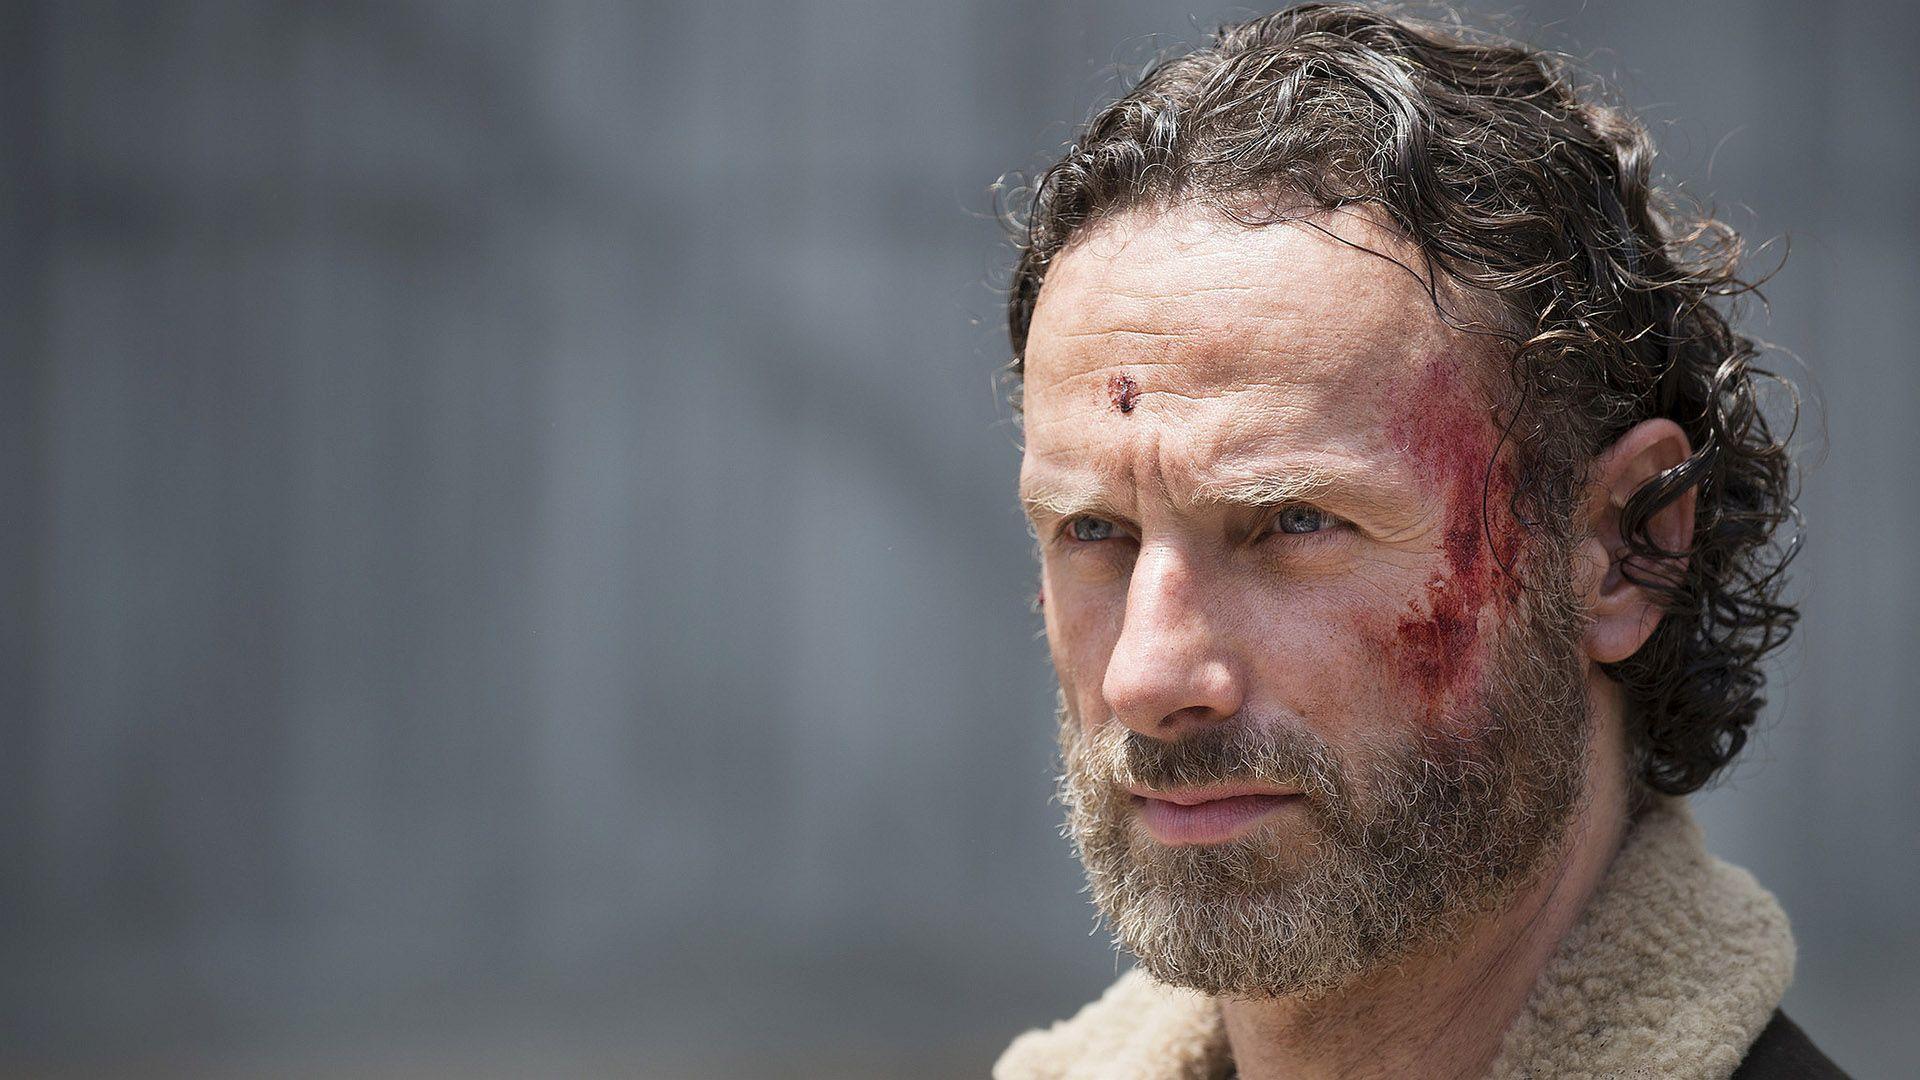 HD Andrew Lincoln as Rick Grimes in The Walking Dead Wallpaper